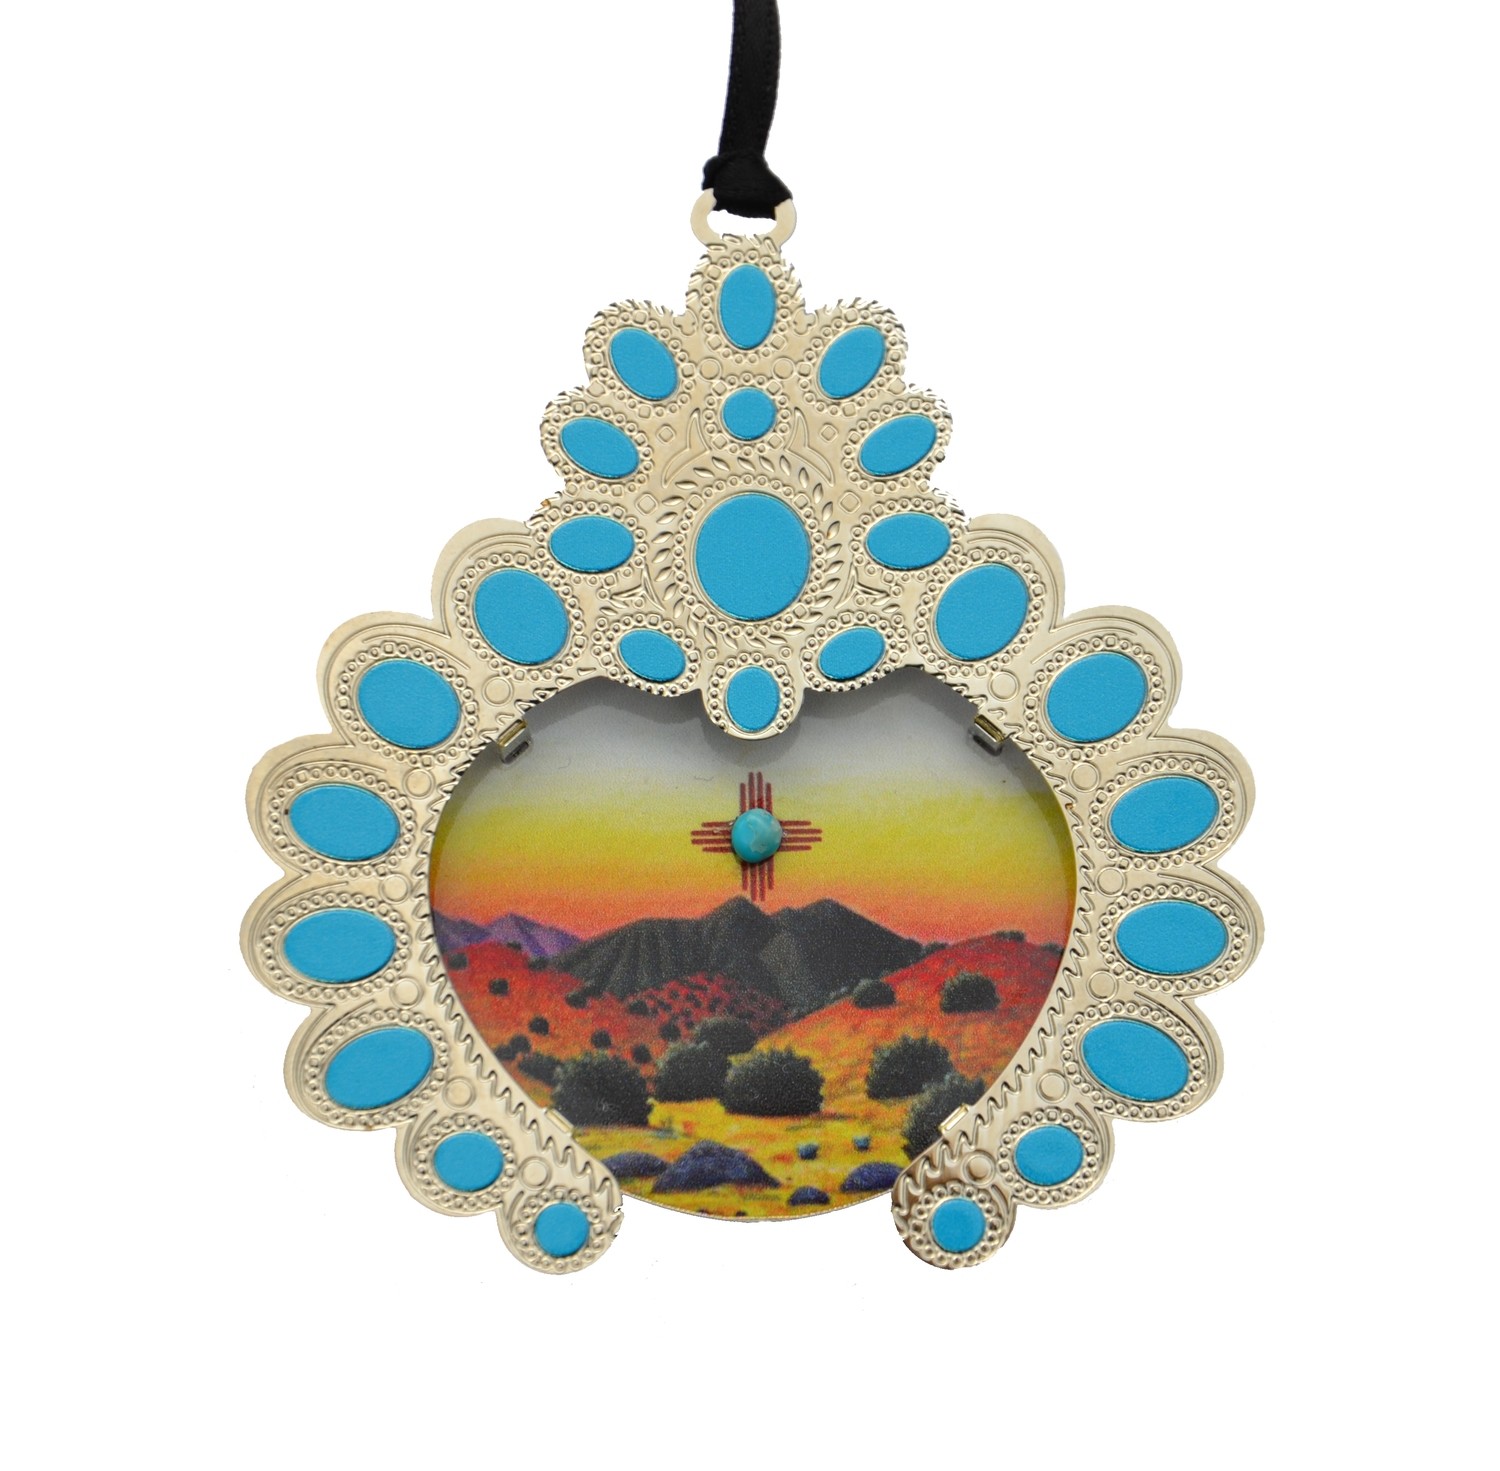 State Gem of New Mexico: Turquoise - 2016/2017